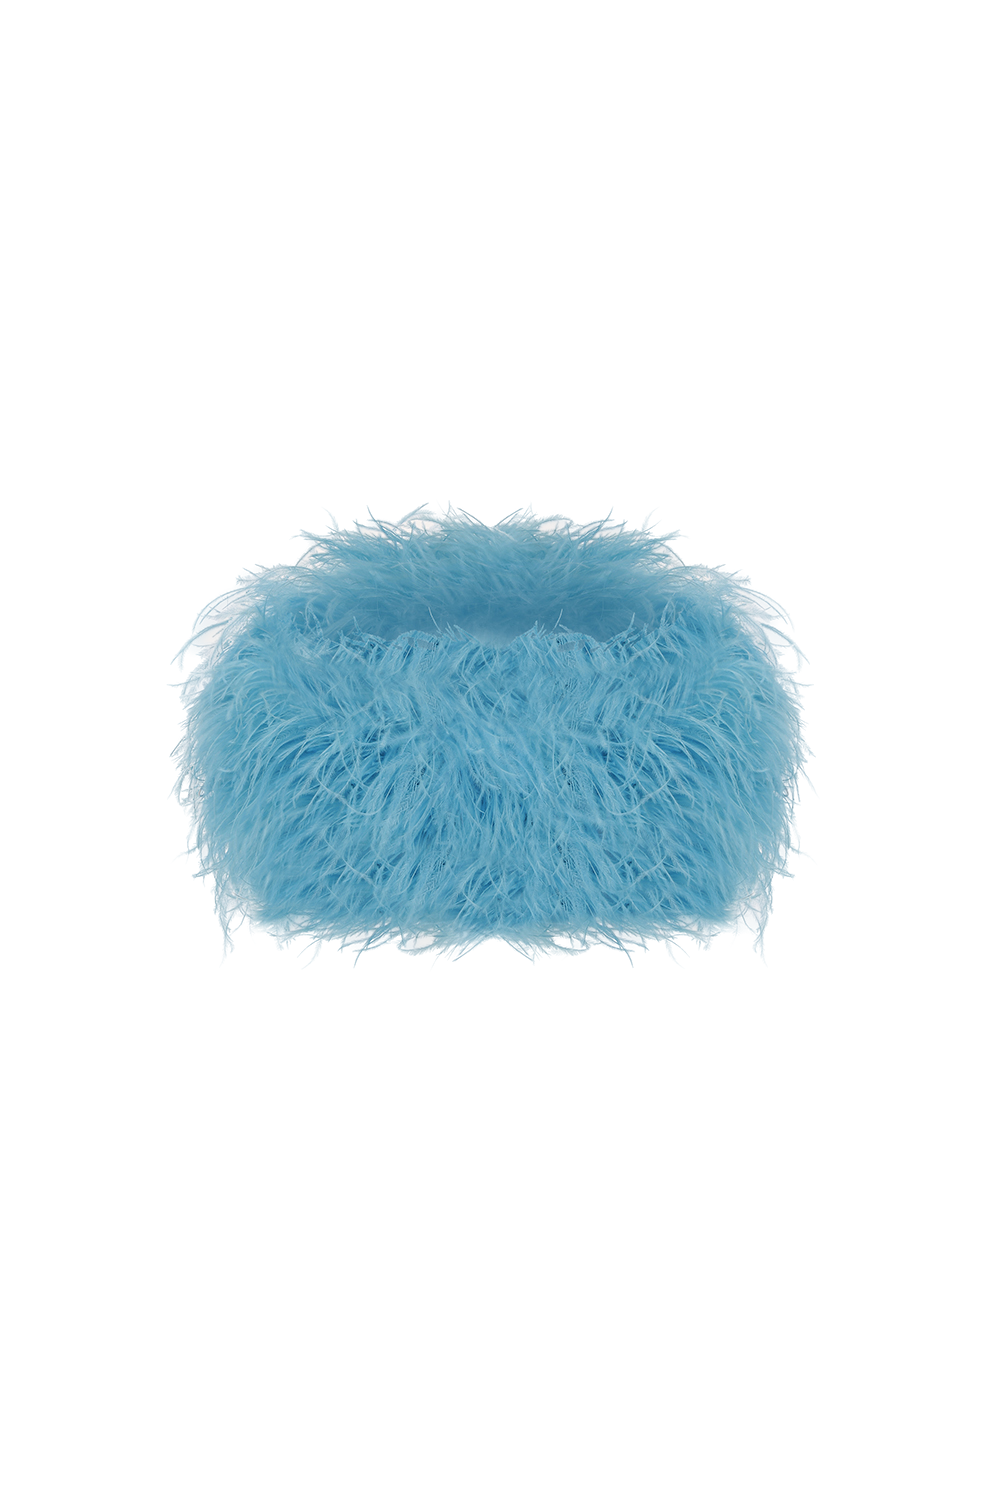 Nelly - Crop Strapless Blue Top With Feathers